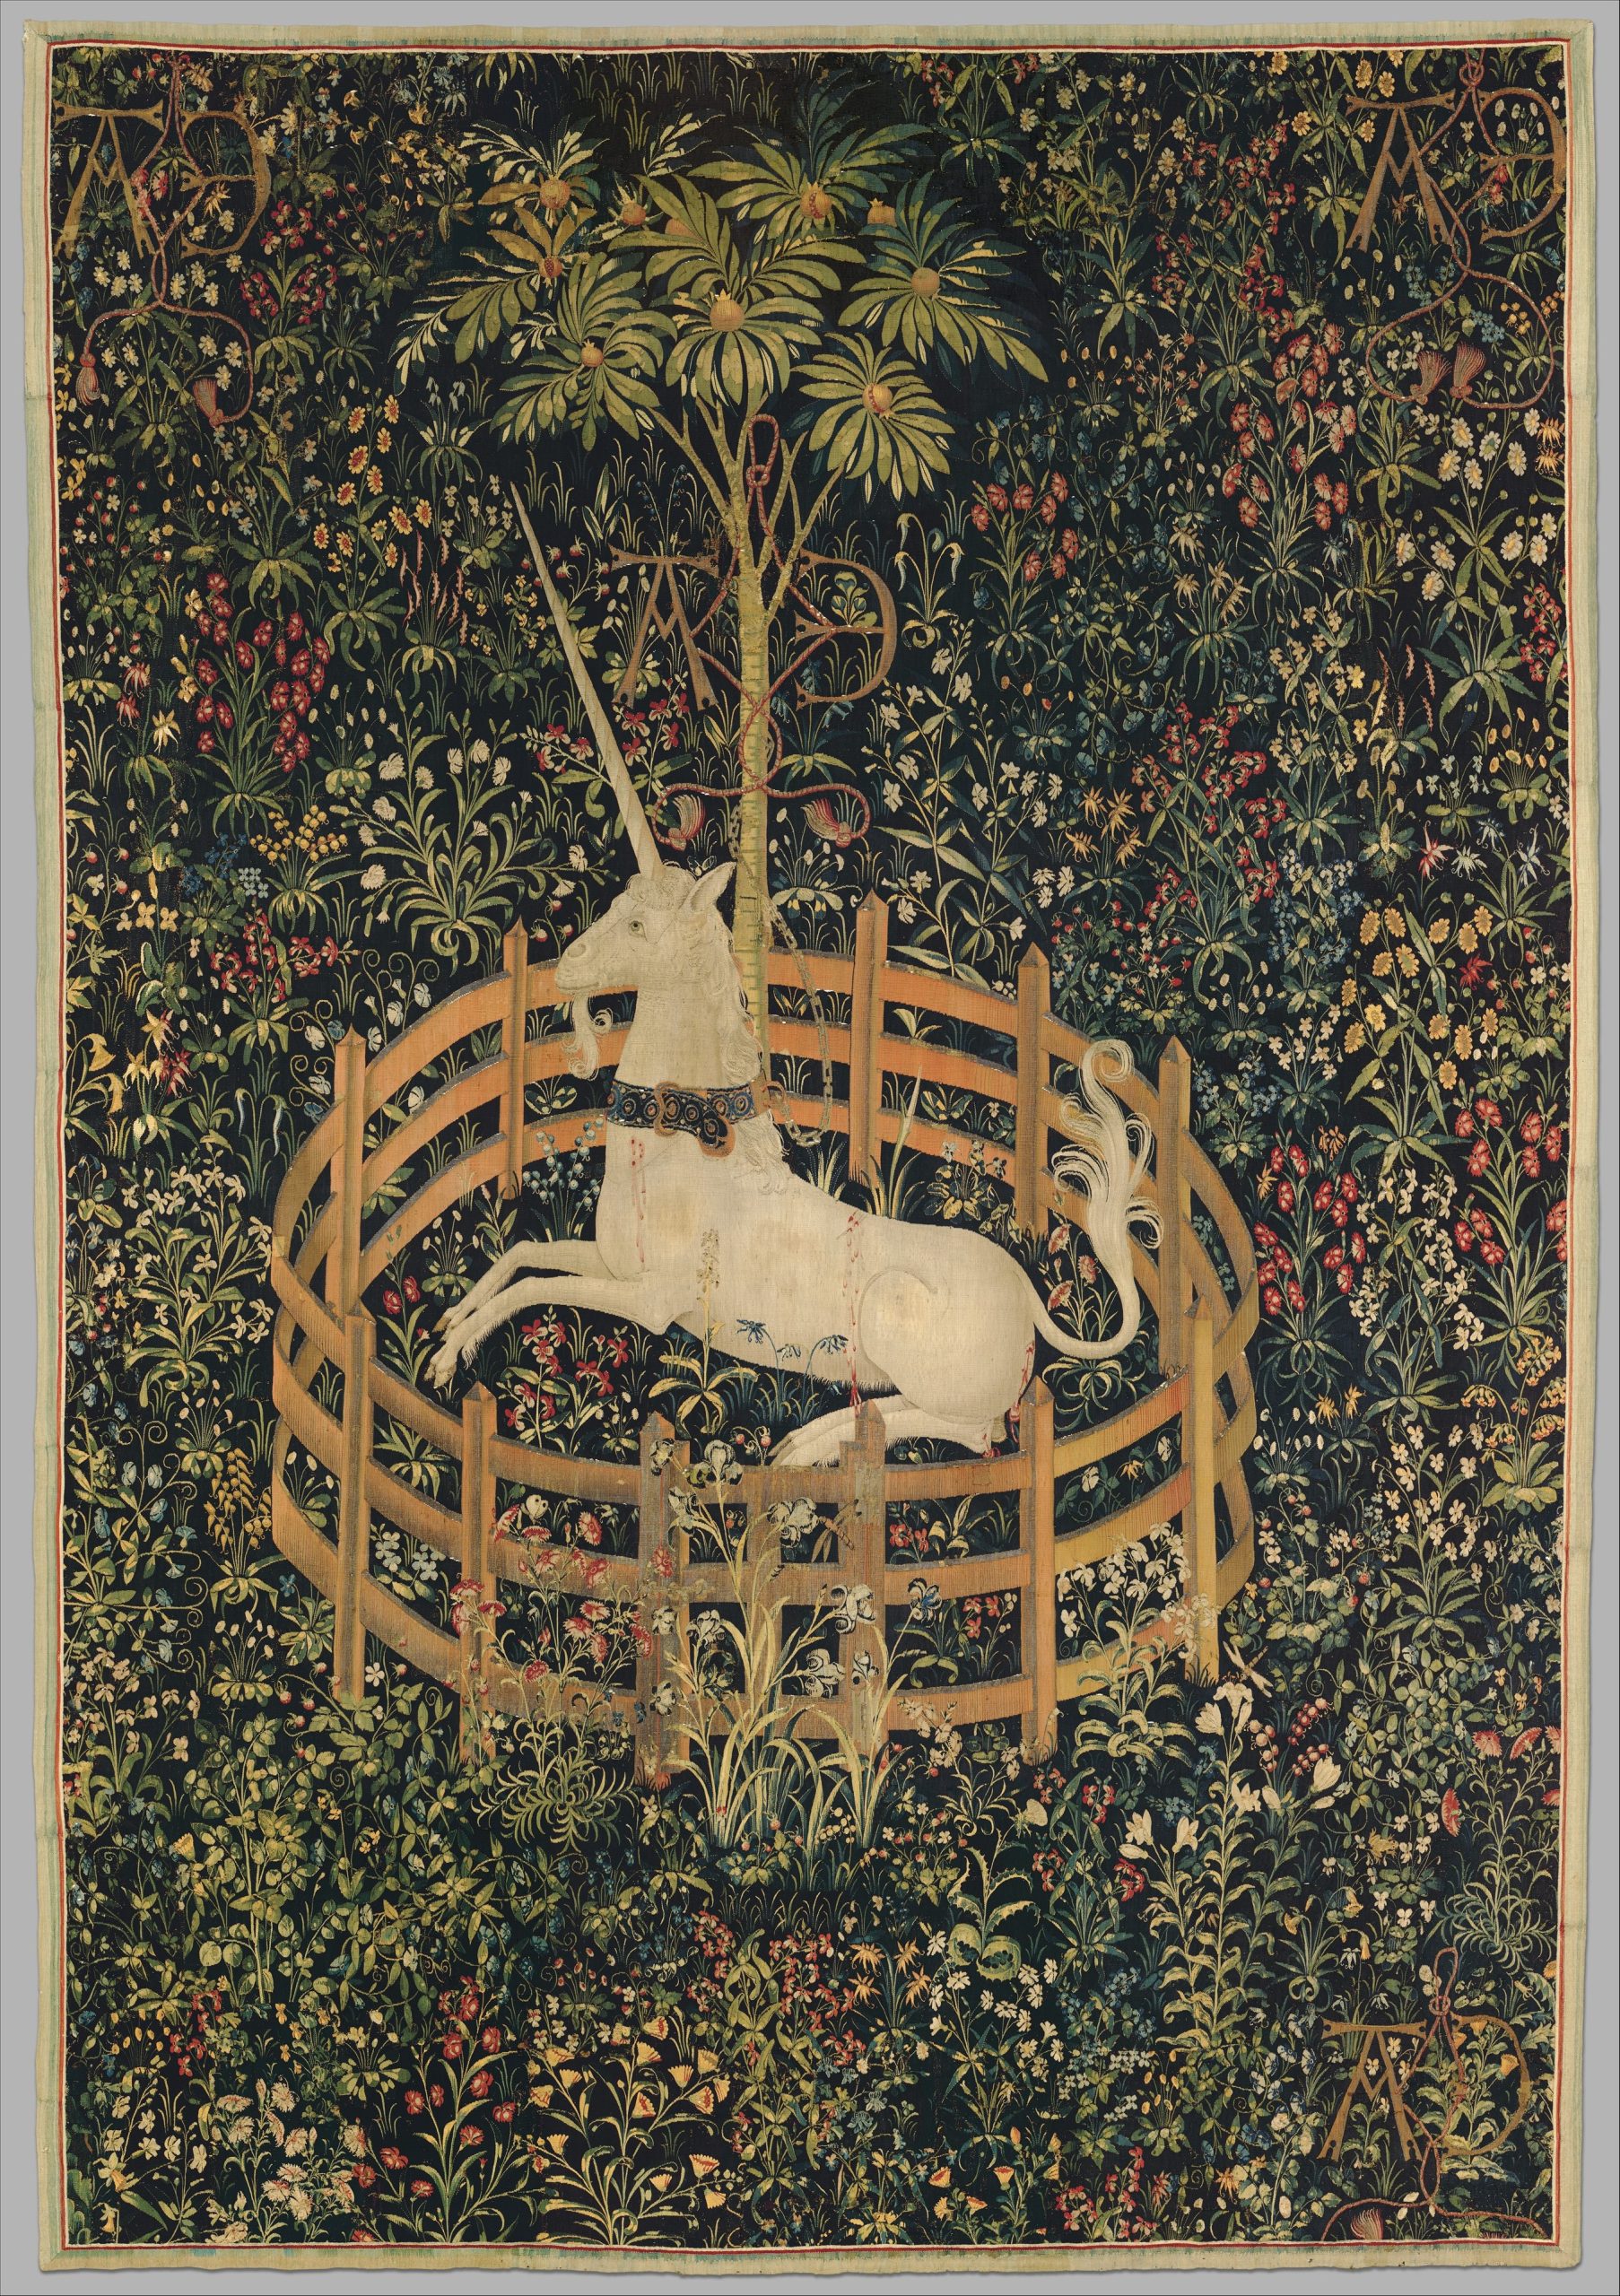 A woven tapestry details an image of a unicorn in a circular fence surrounded by patterns of flowers.